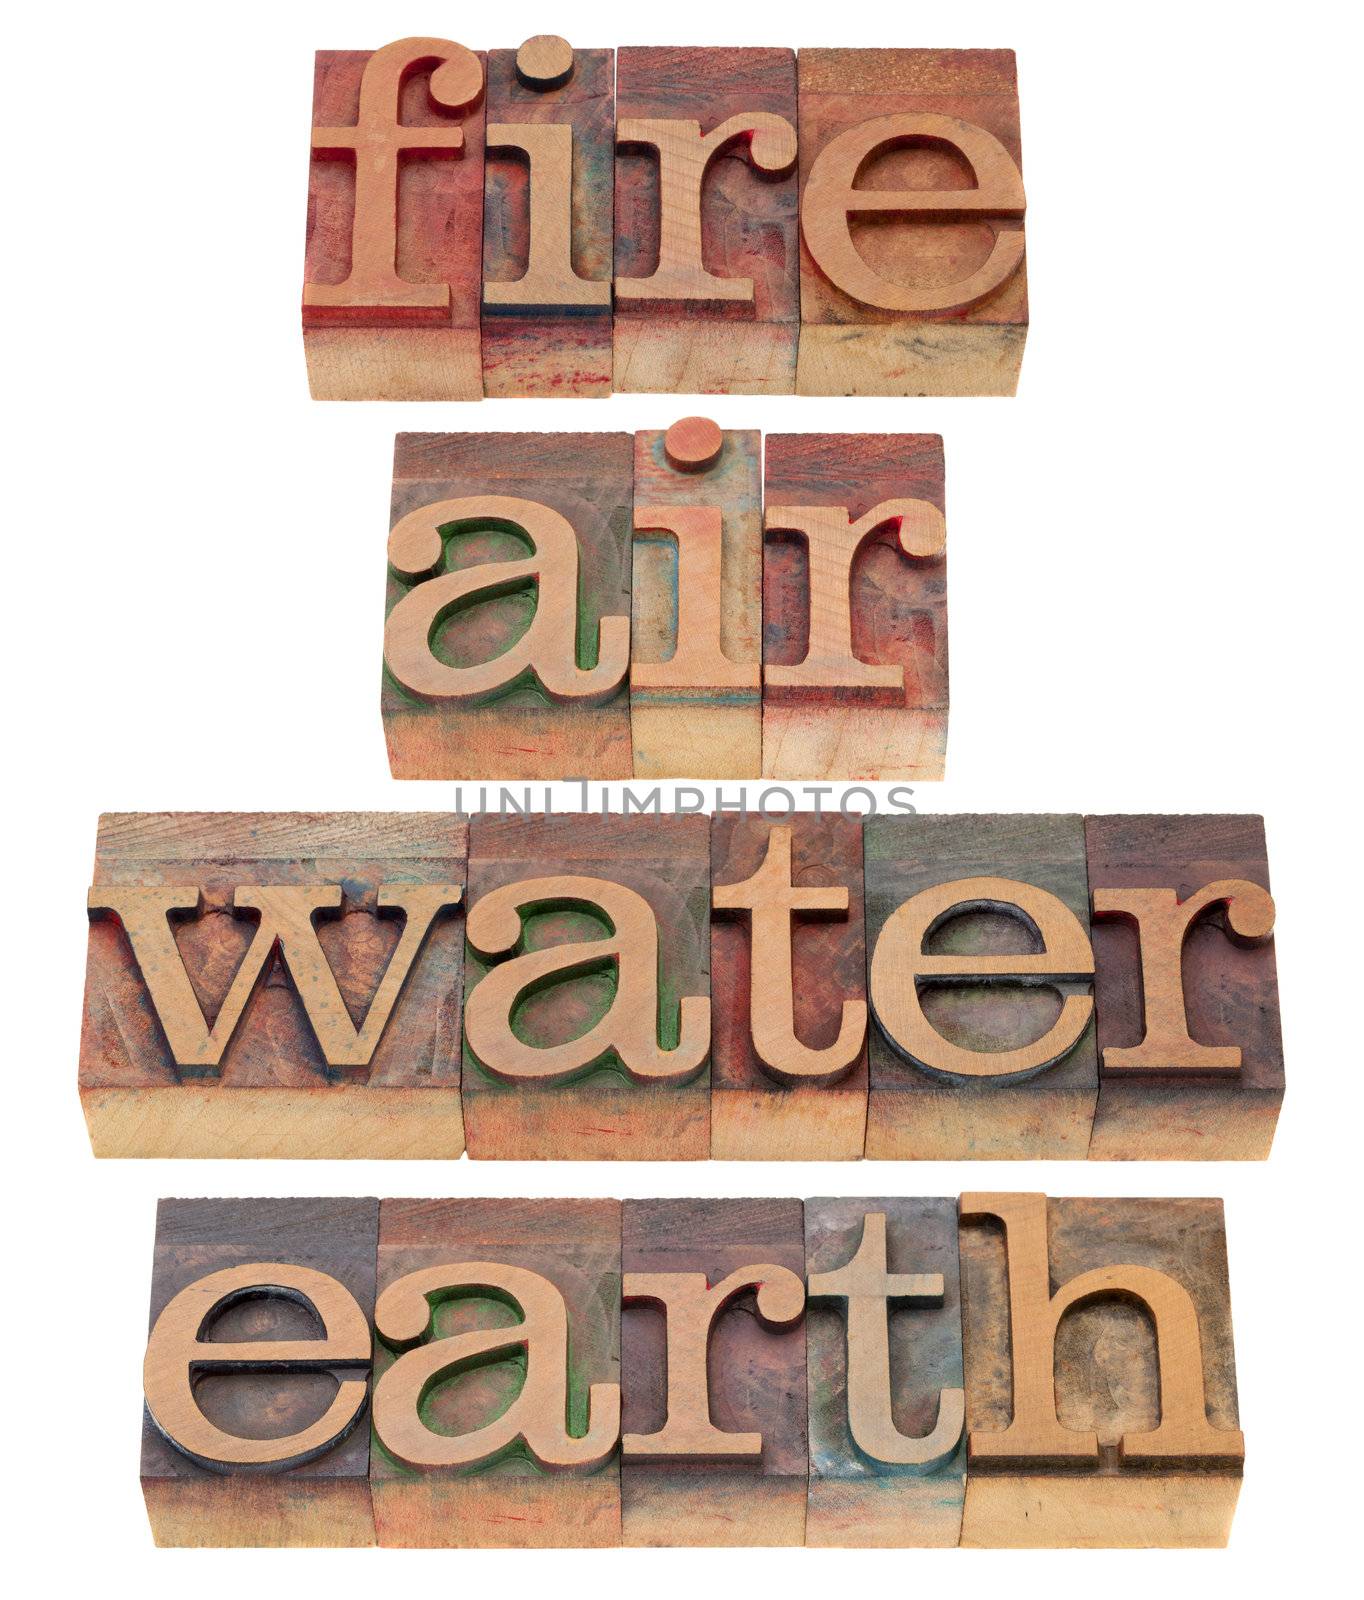 four classical elements of Greek philosophy - fire, air, water and earth - words in vintage wooden letterpress printing blocks, isolated on white